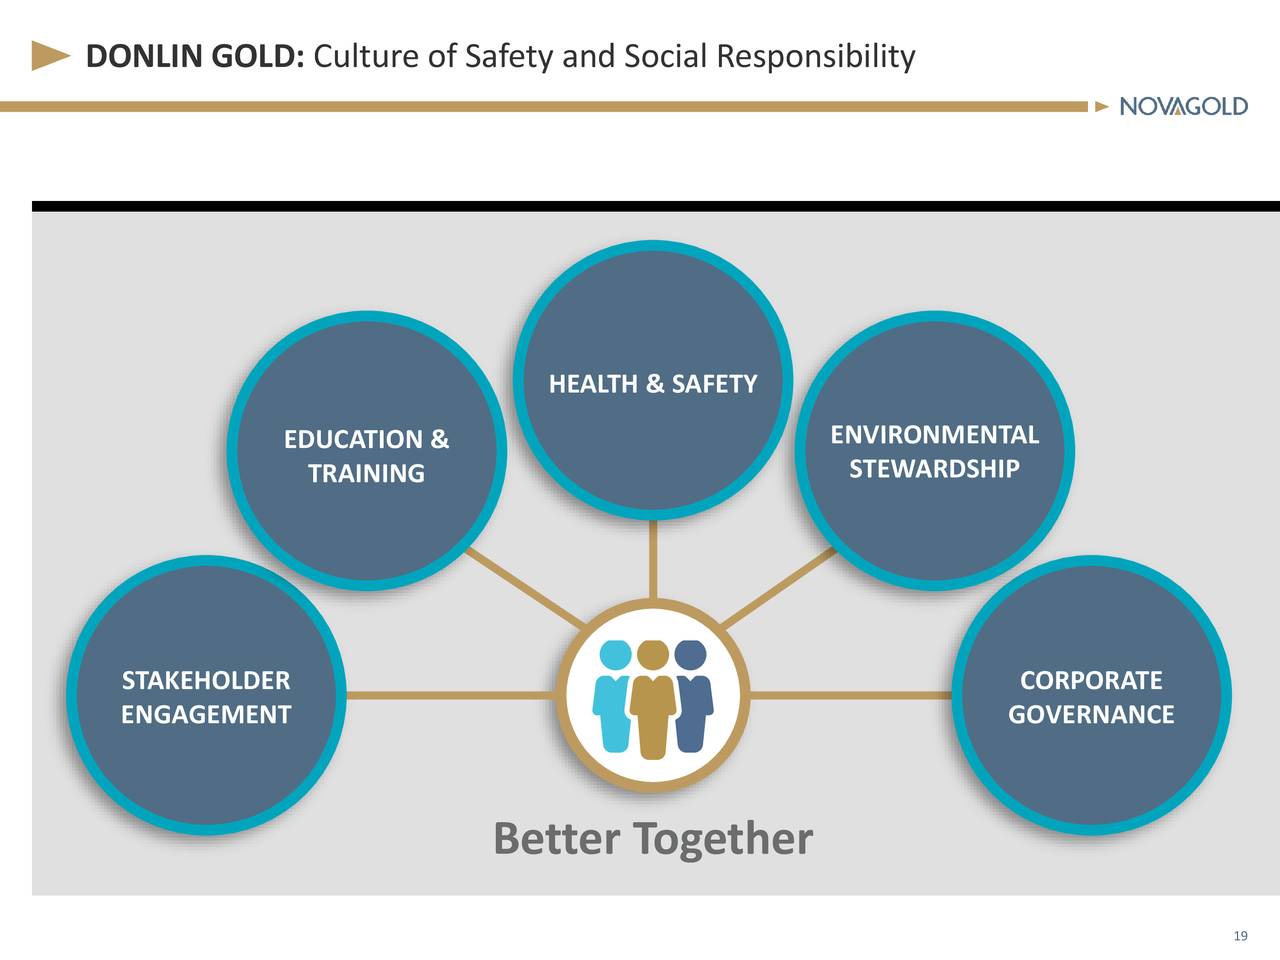 DONLIN GOLD: Culture of Safety and Social Responsibility